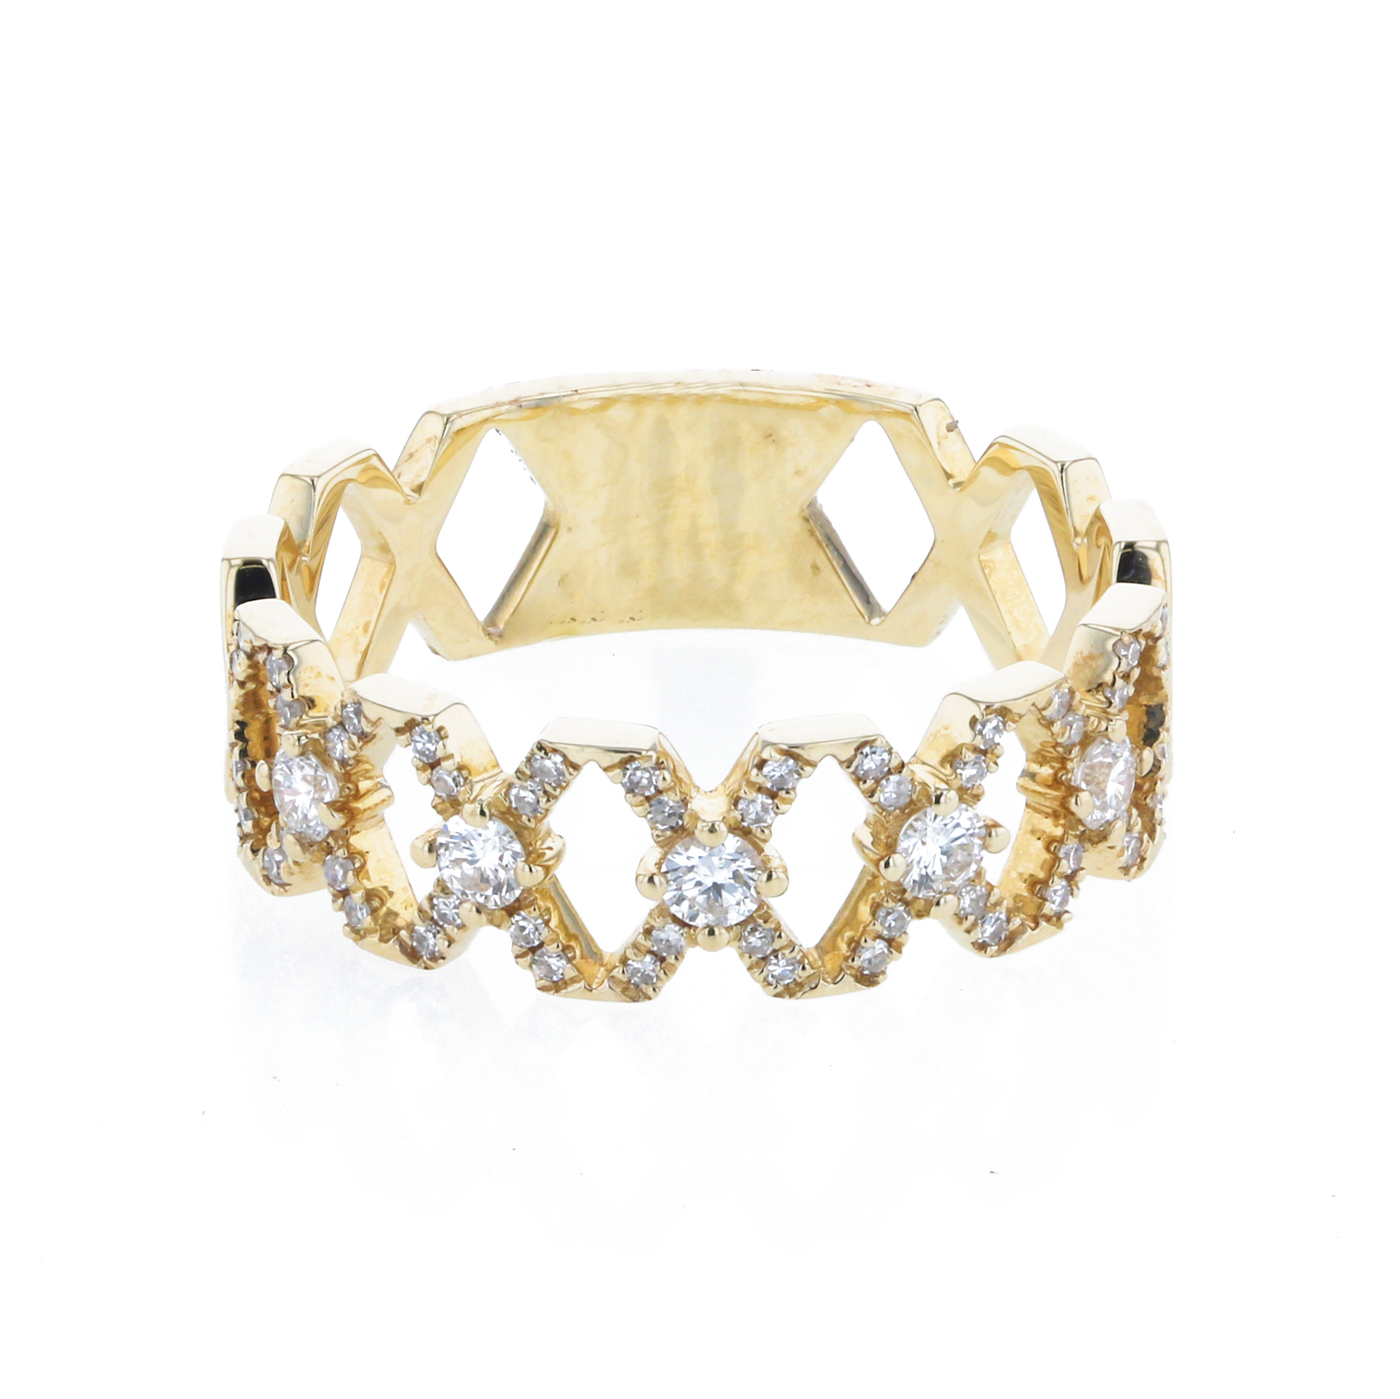 "The X-ellence Ring" 0.30 cttw Diamond Ring in 14k yellow gold